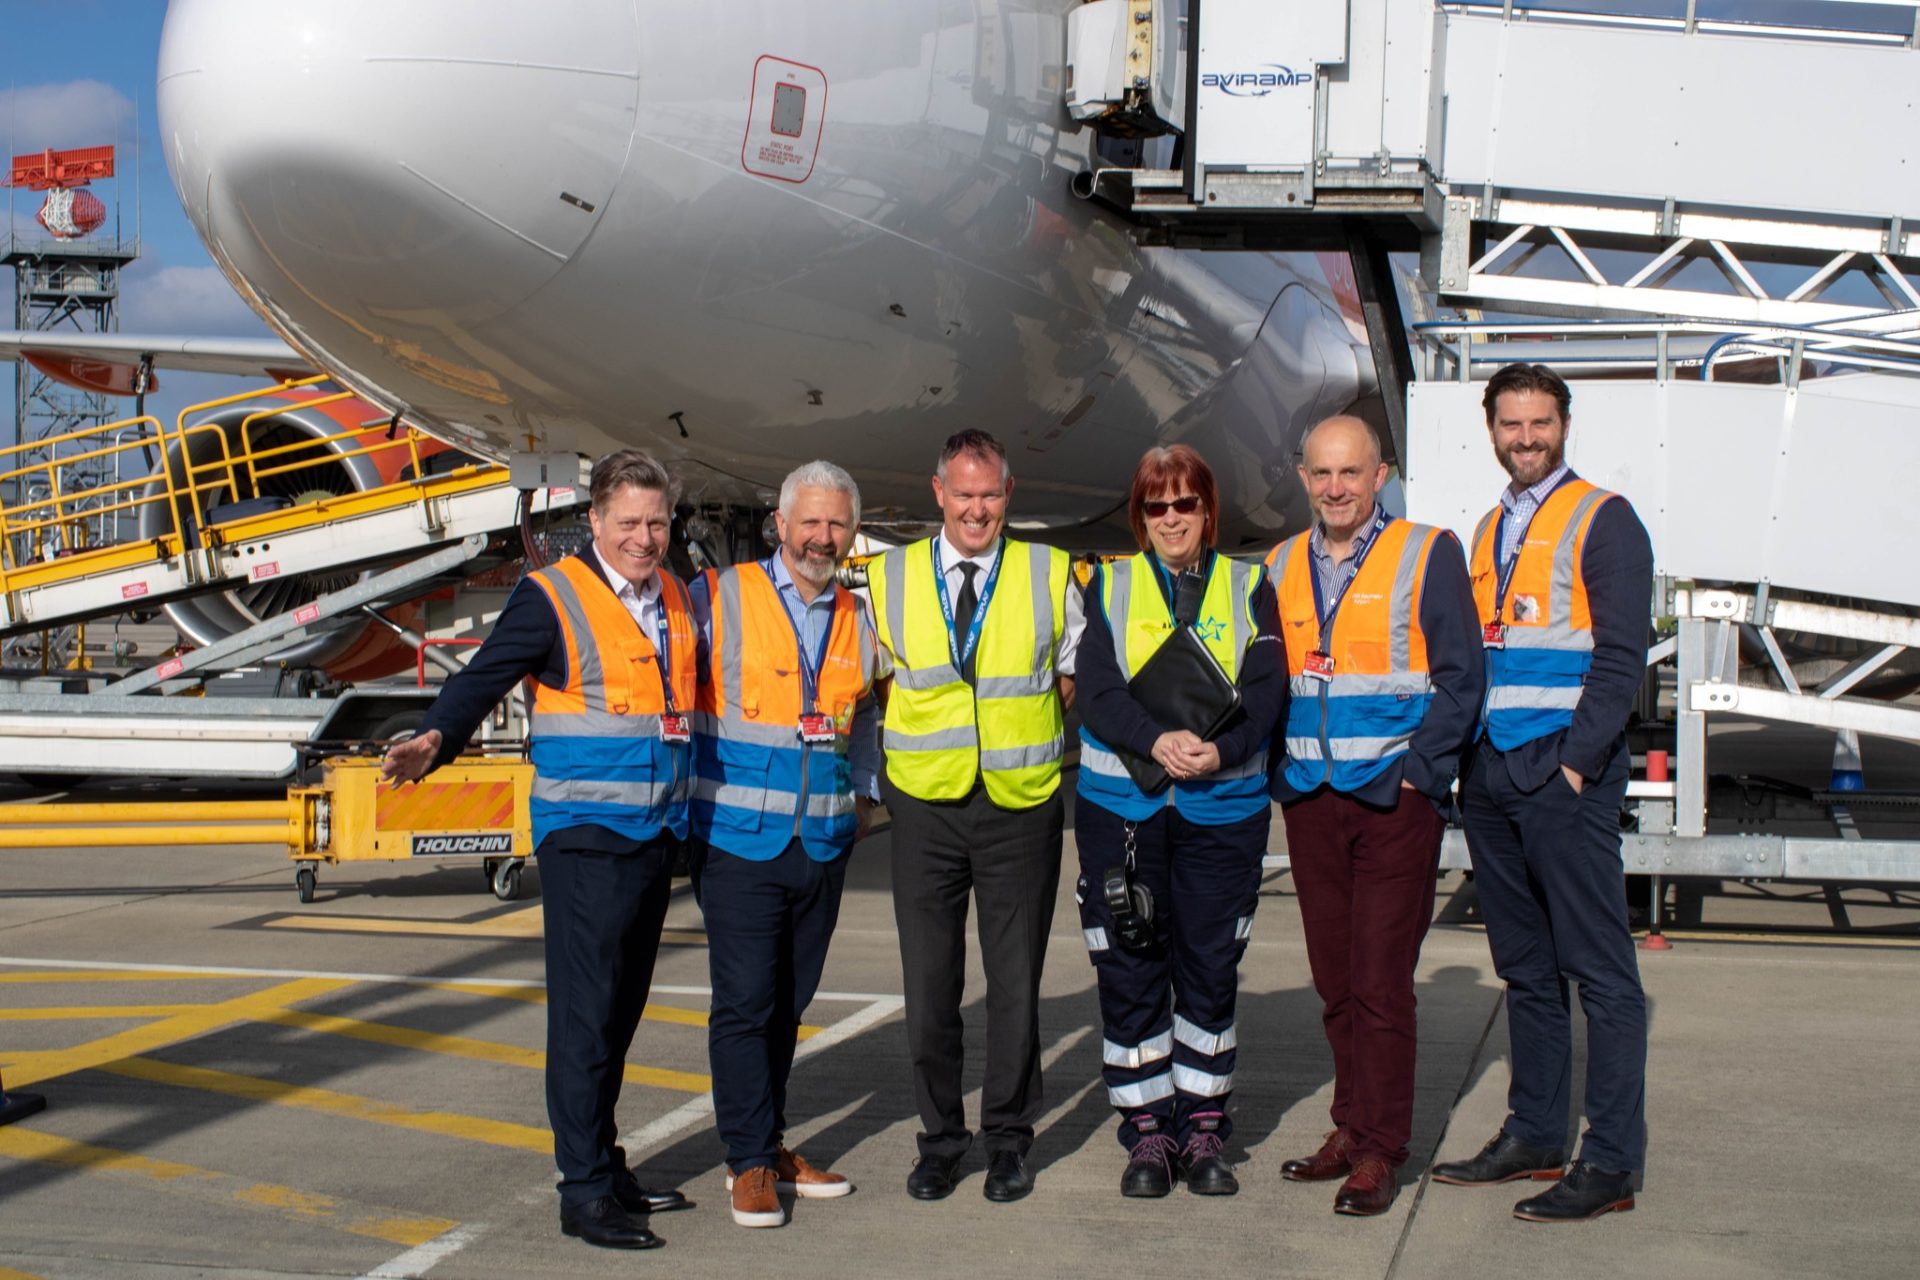 Team in front of an easyJet plane celebrating the launch of flights to Palma de Mallorca on the runway at London Southend Airport